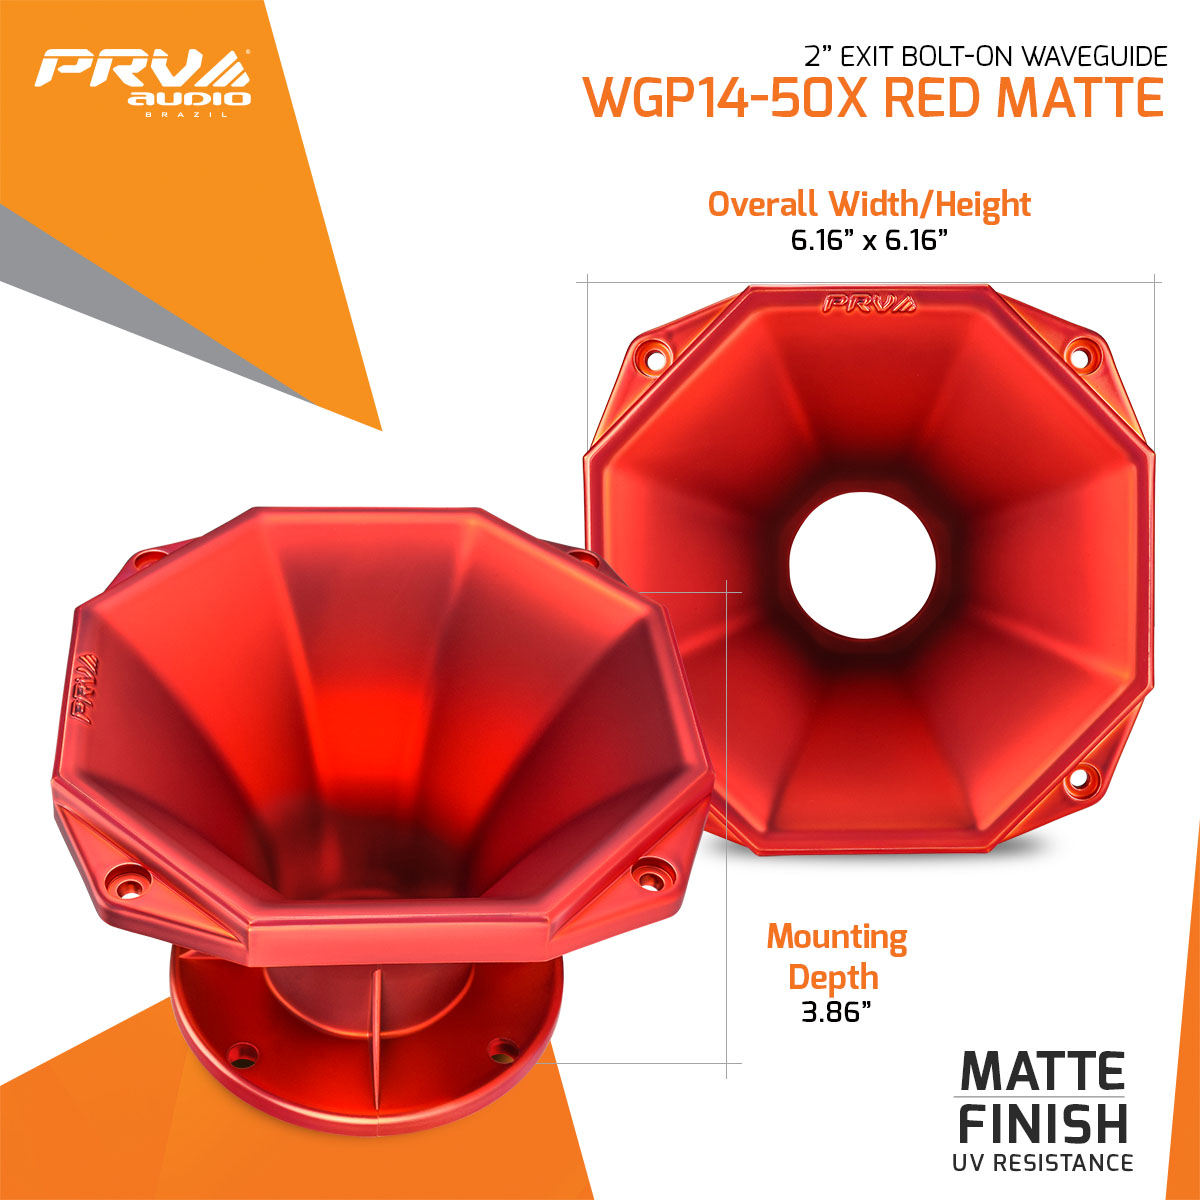 WGP14-50X - Dims Infographic - RED MATTE